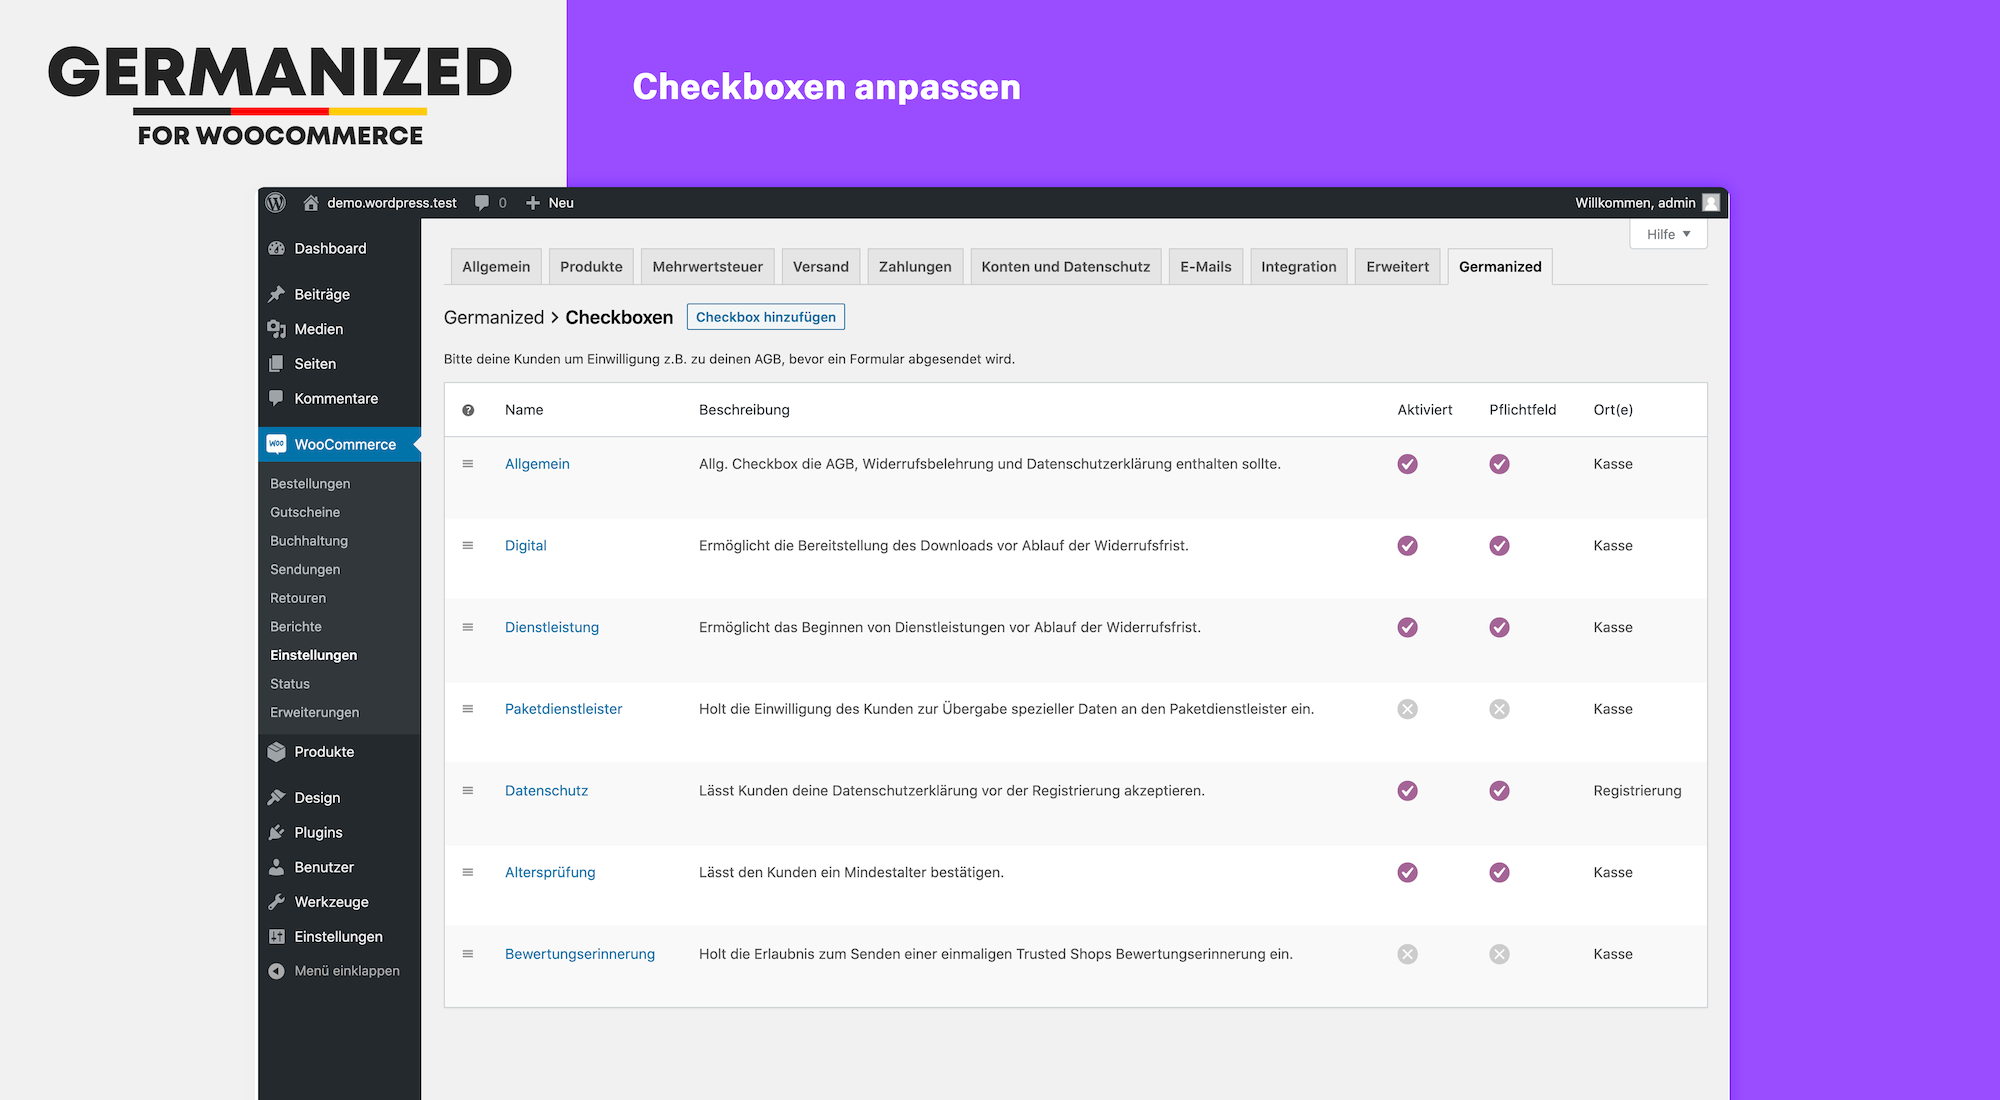 Germanized for WooCommerce Legal Checkboxes UI